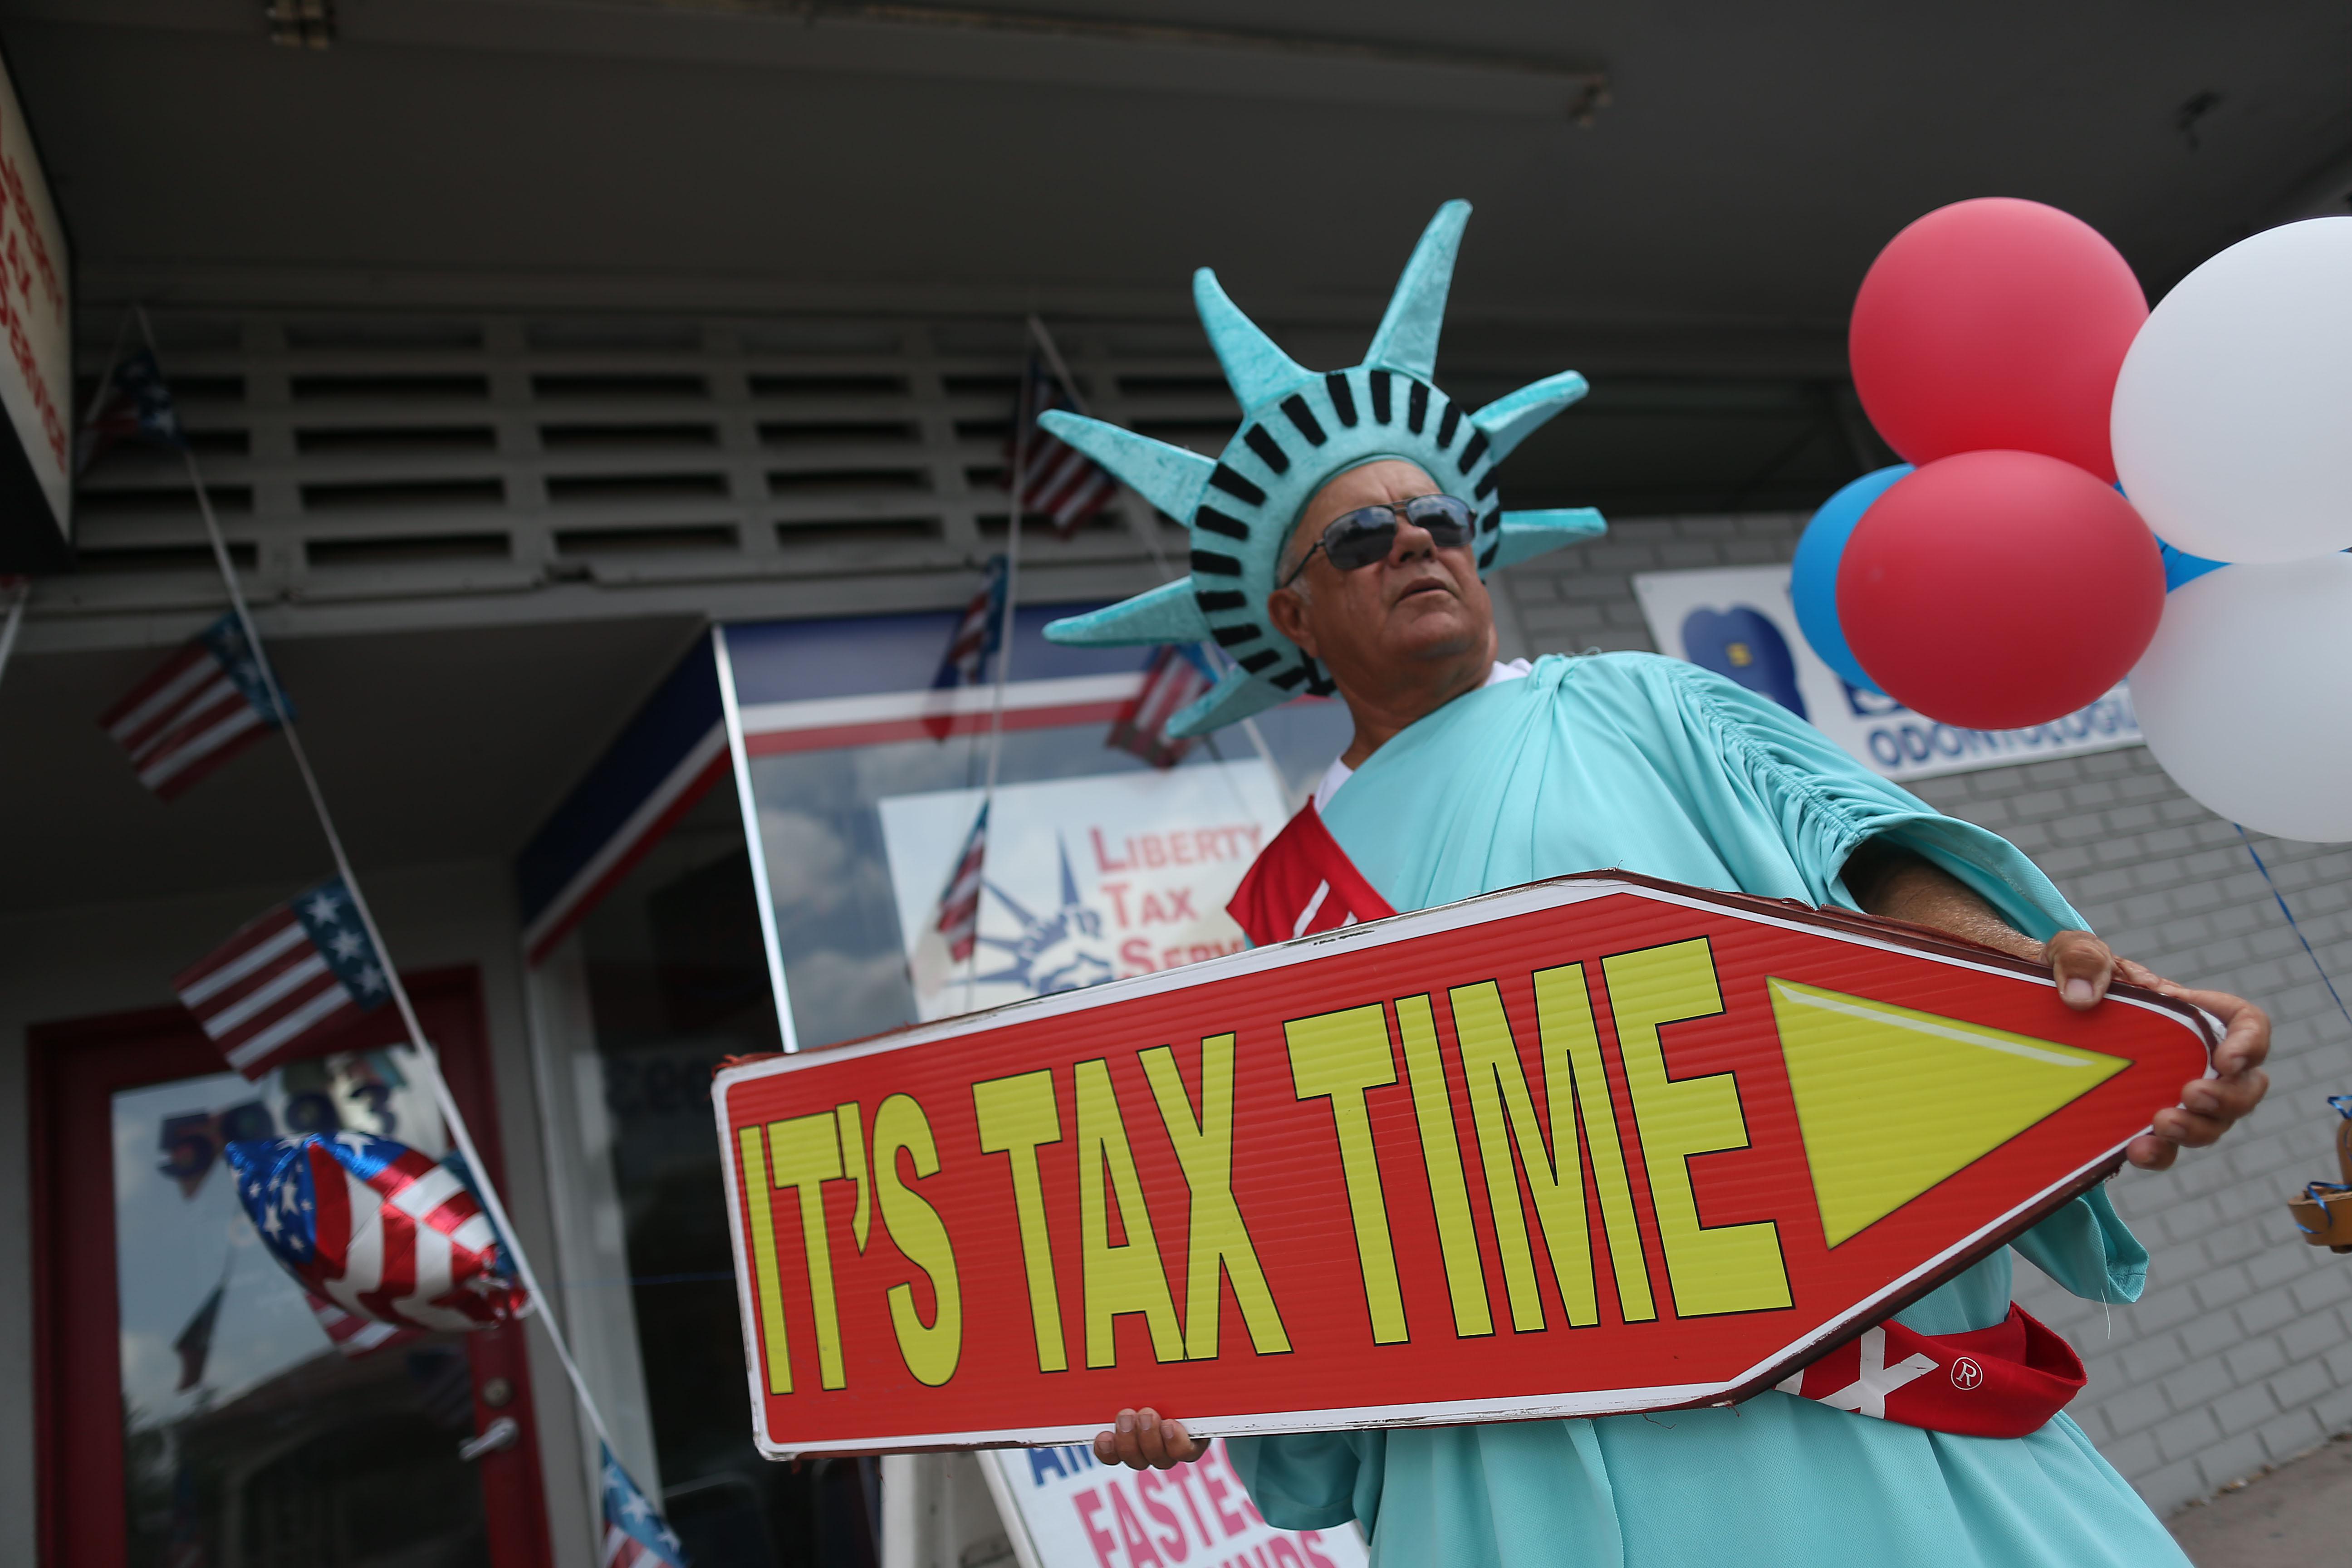 MIAMI, FL - APRIL 15:  Armando La Rosa directs people to the Liberty Tax Service office as the deadline to file taxes looms on April 15, 2016 in Miami, Florida.  The Internal Revenue Service moved the deadline from April 15th to Monday the 18th due to the Emancipation Day holiday in Washington, D.C.  (Photo by Joe Raedle/Getty Images)